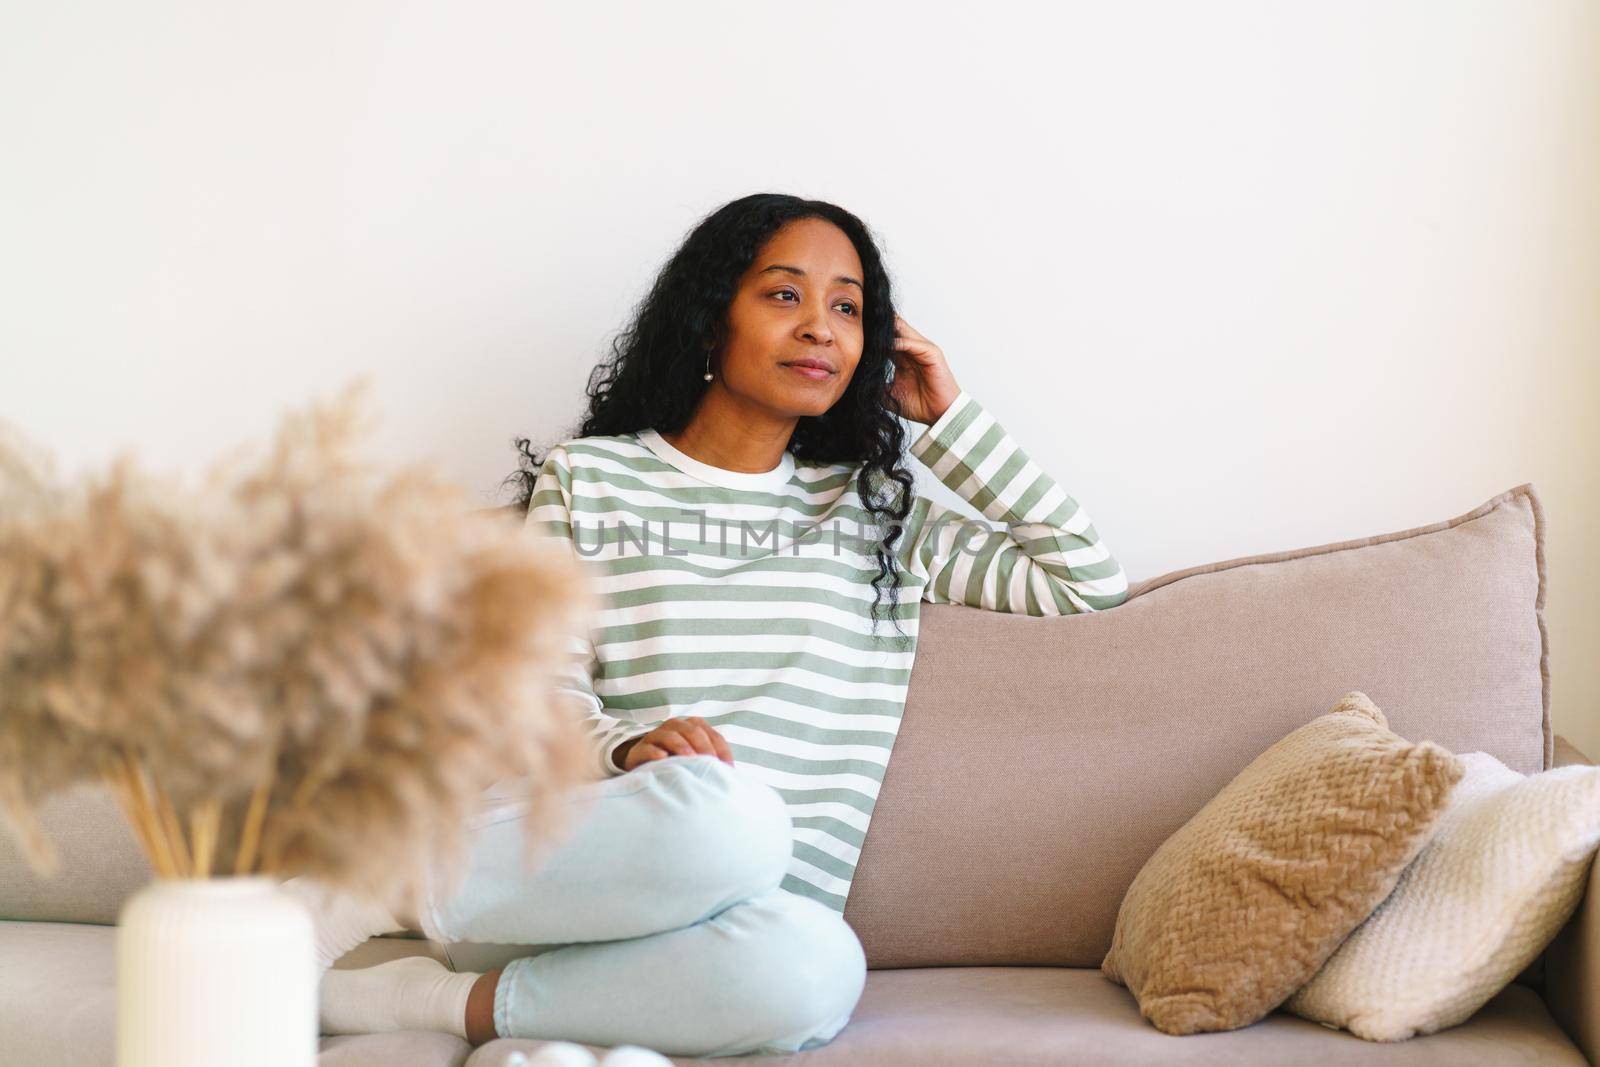 Happy young african-american female sitting on couch in living room. Concept of enjoying life and slow pace lifestyle. Thoughtful smiling woman self-reflecting